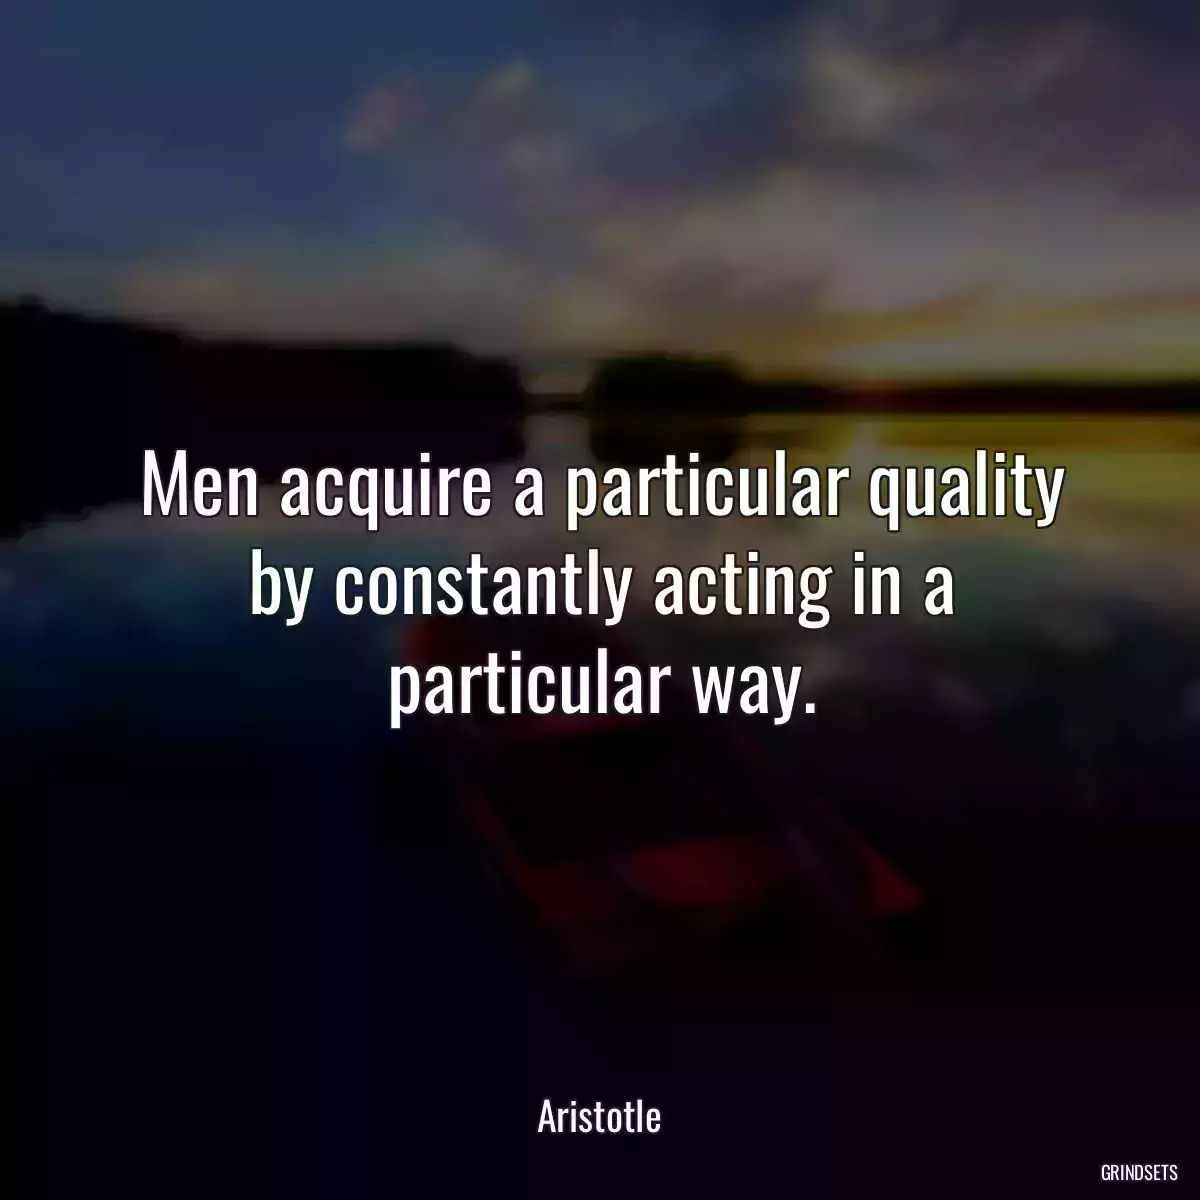 Men acquire a particular quality by constantly acting in a particular way.